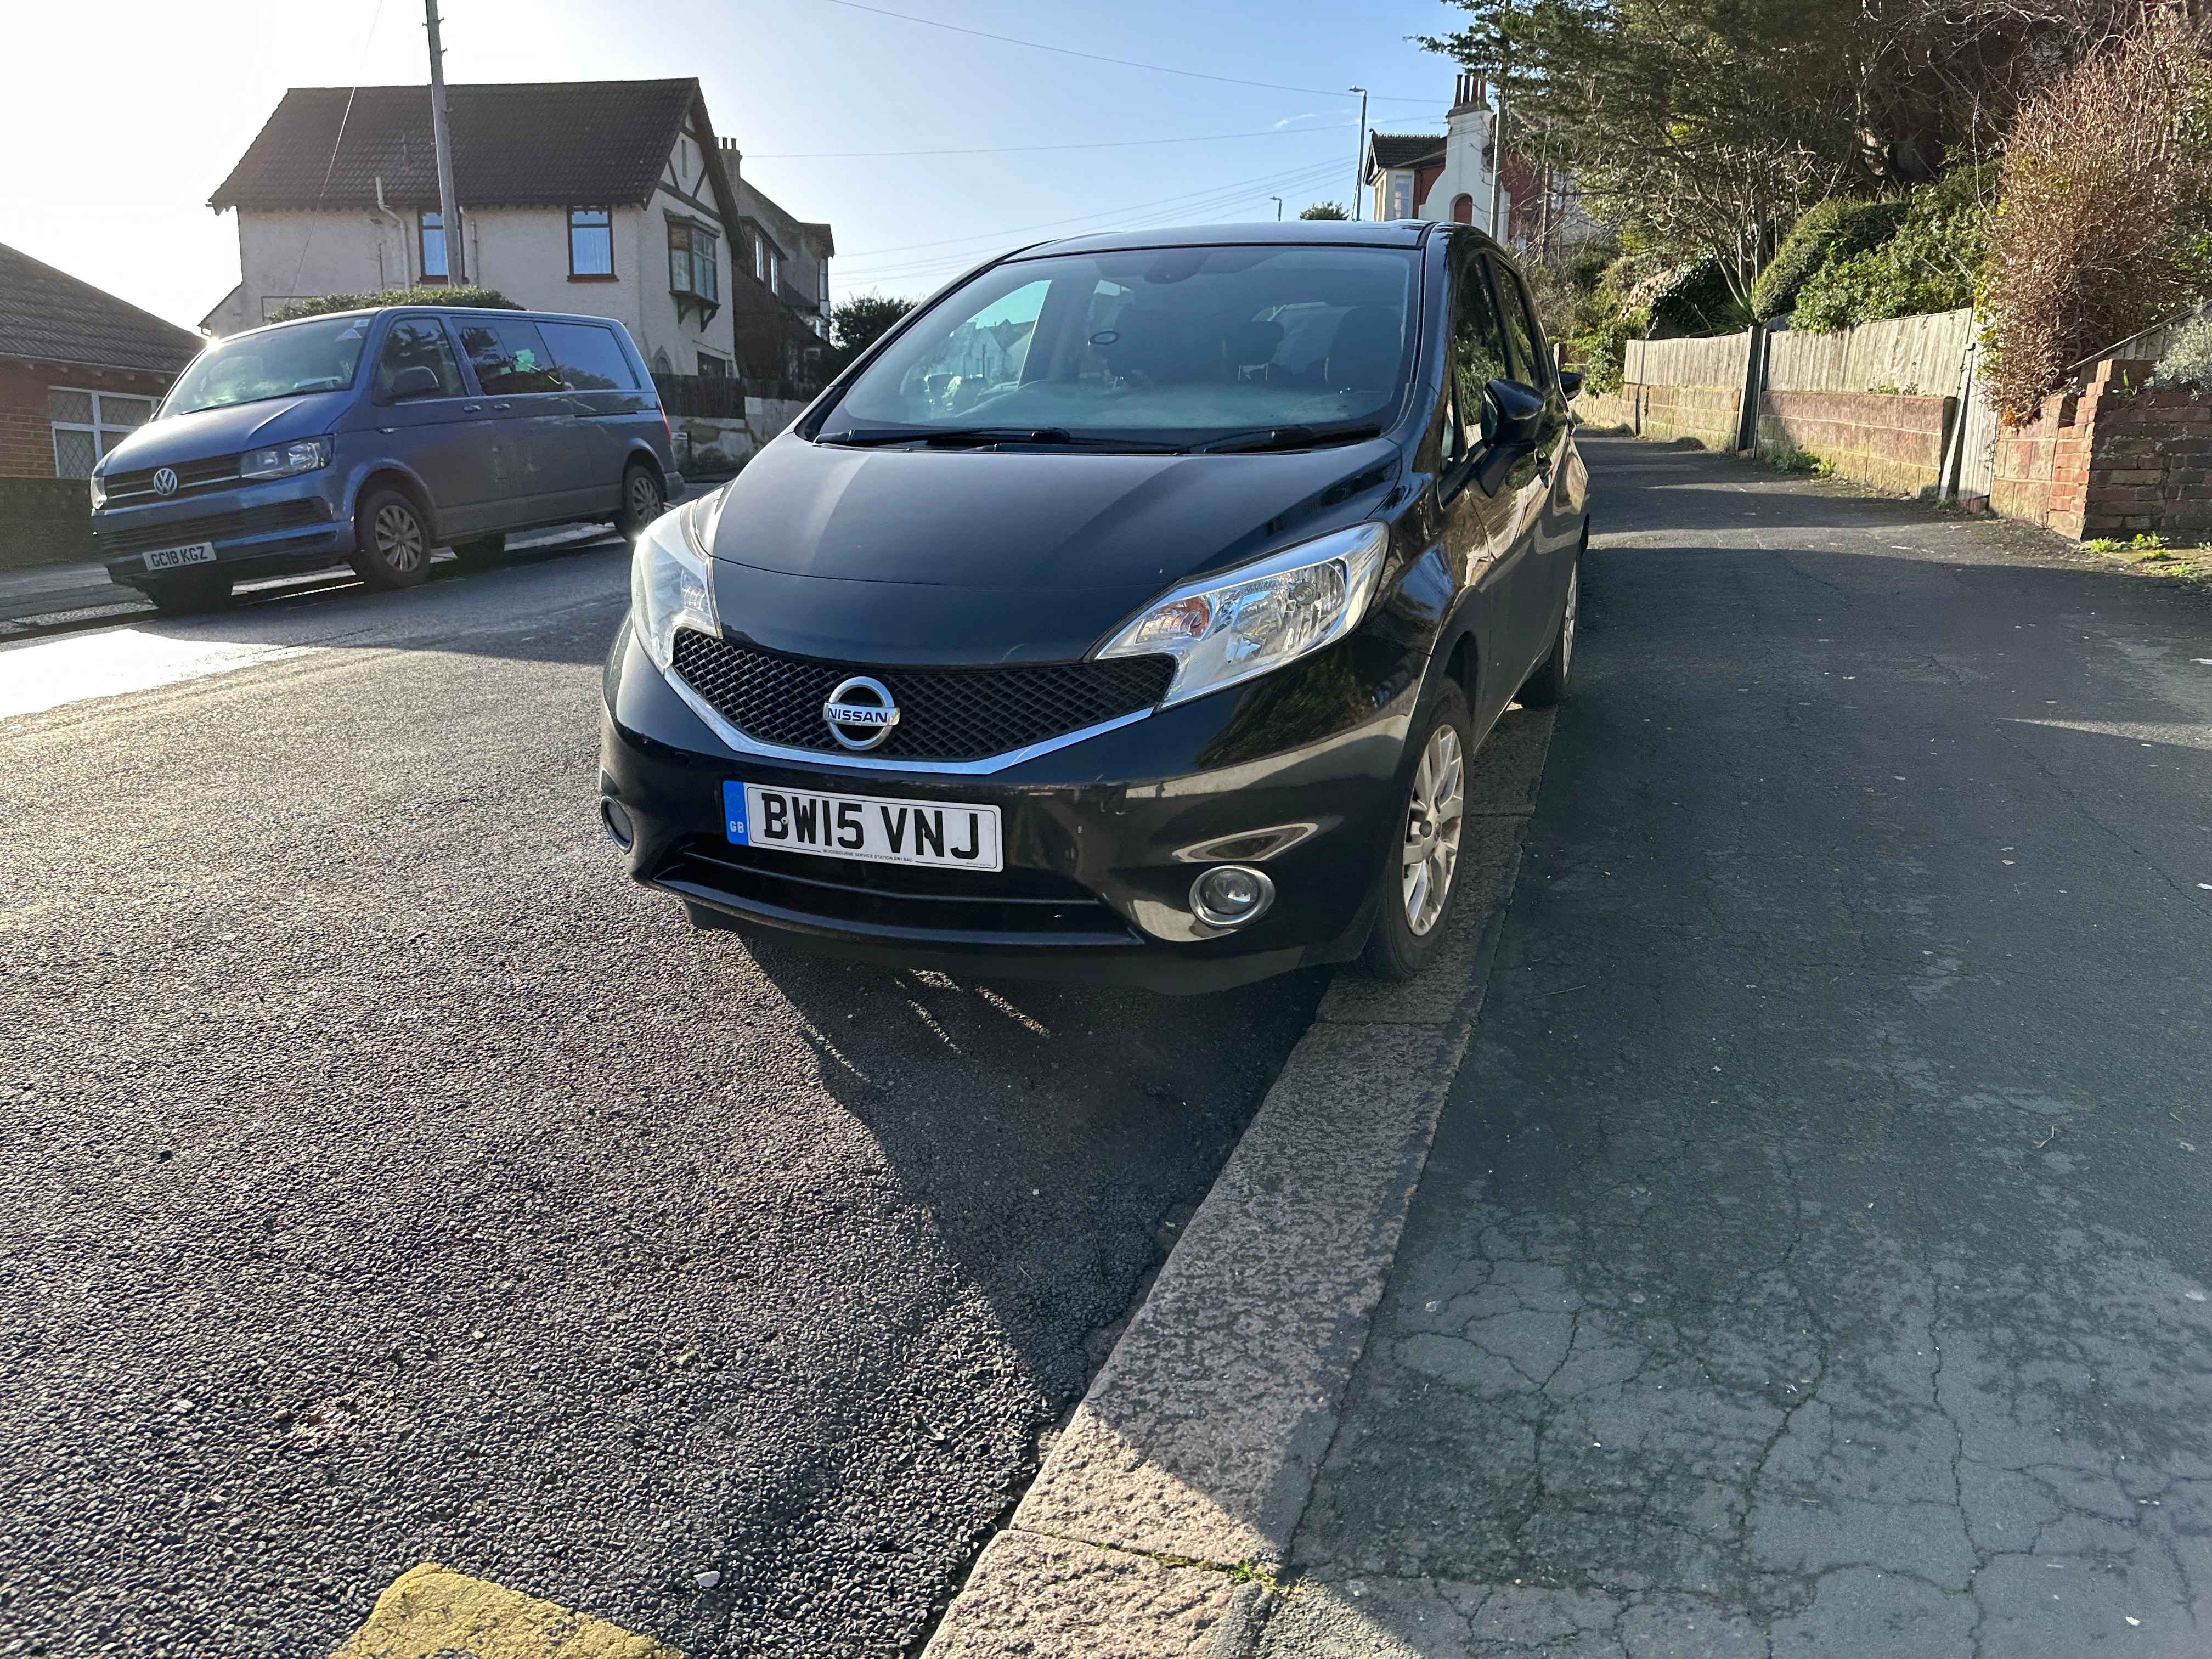 Photograph of BW15 VNJ - a Black Nissan Note parked in Hollingdean by a non-resident who uses the local area as part of their Brighton commute. The sixth of fifteen photographs supplied by the residents of Hollingdean.